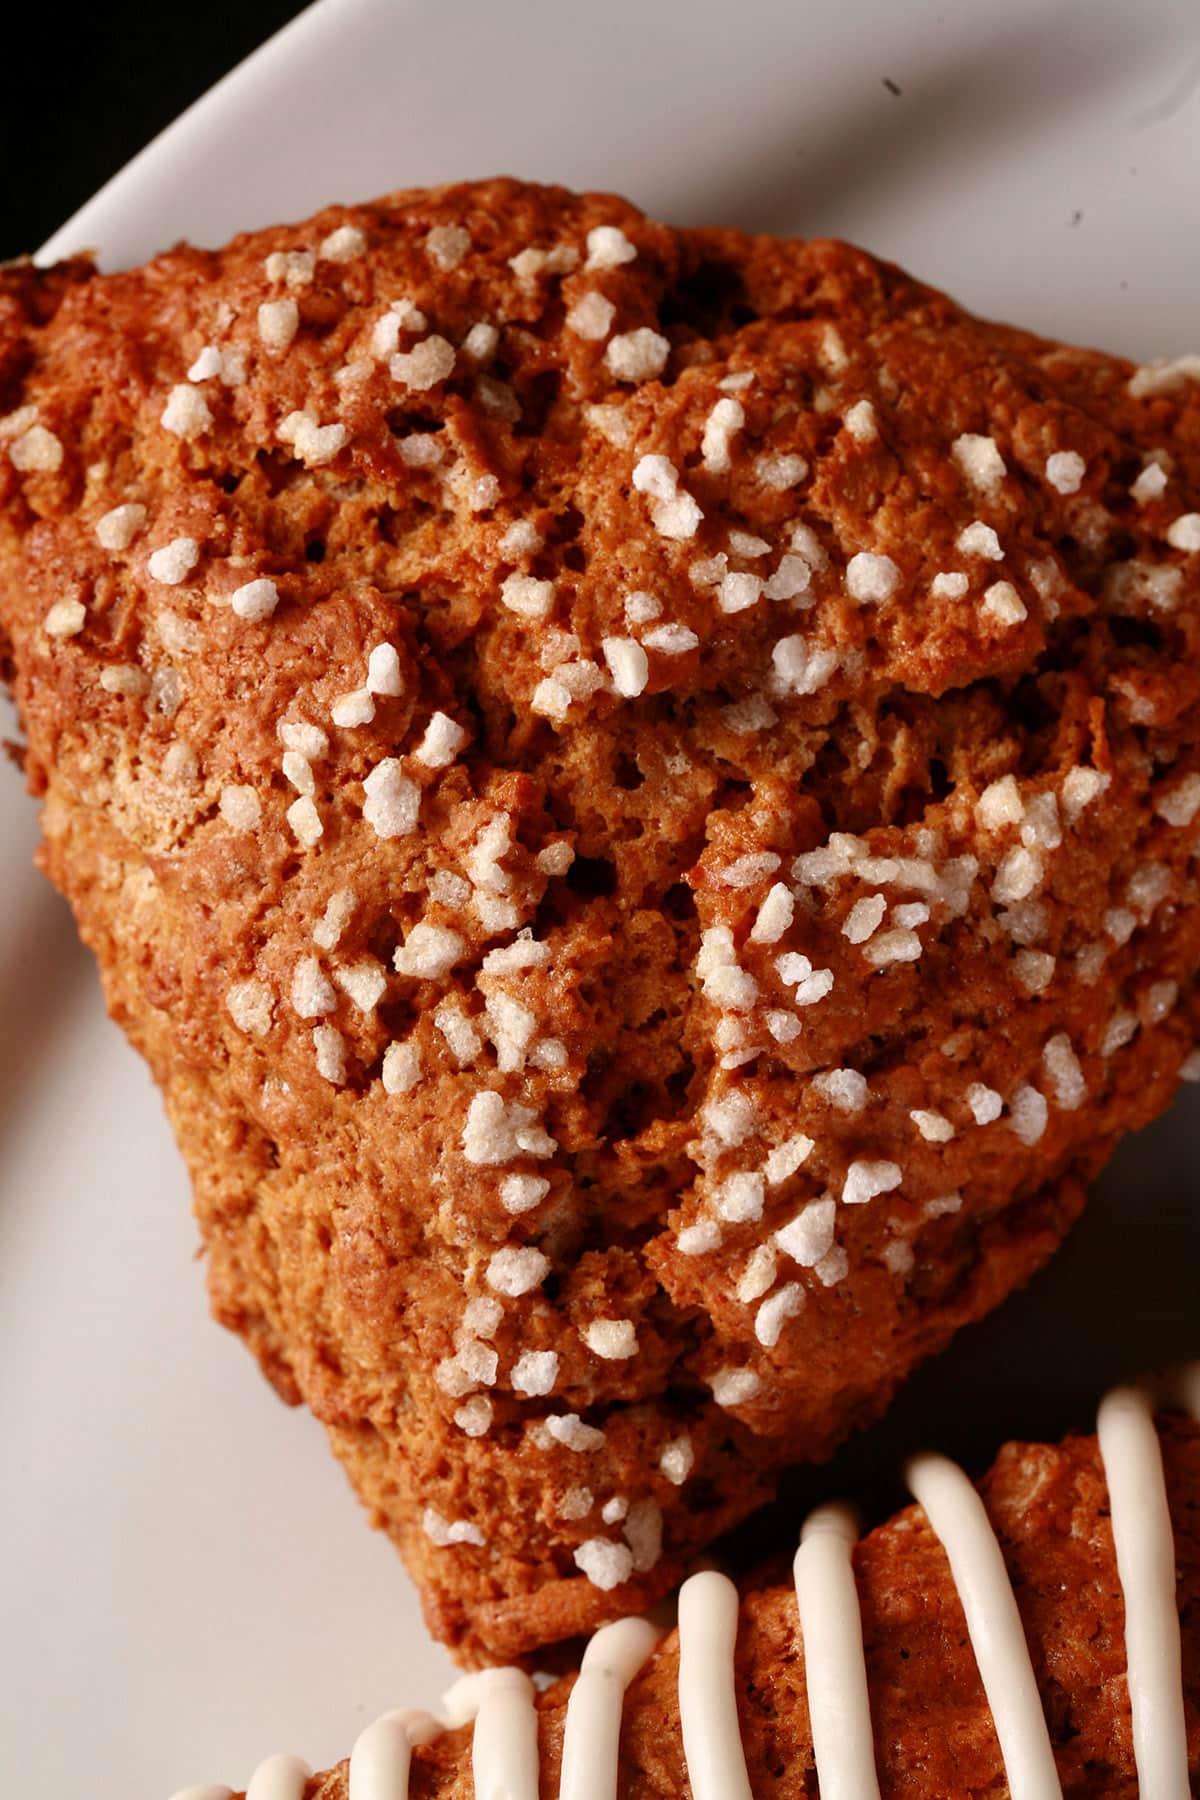 A close up view of a sugar topped gingerbread scone.